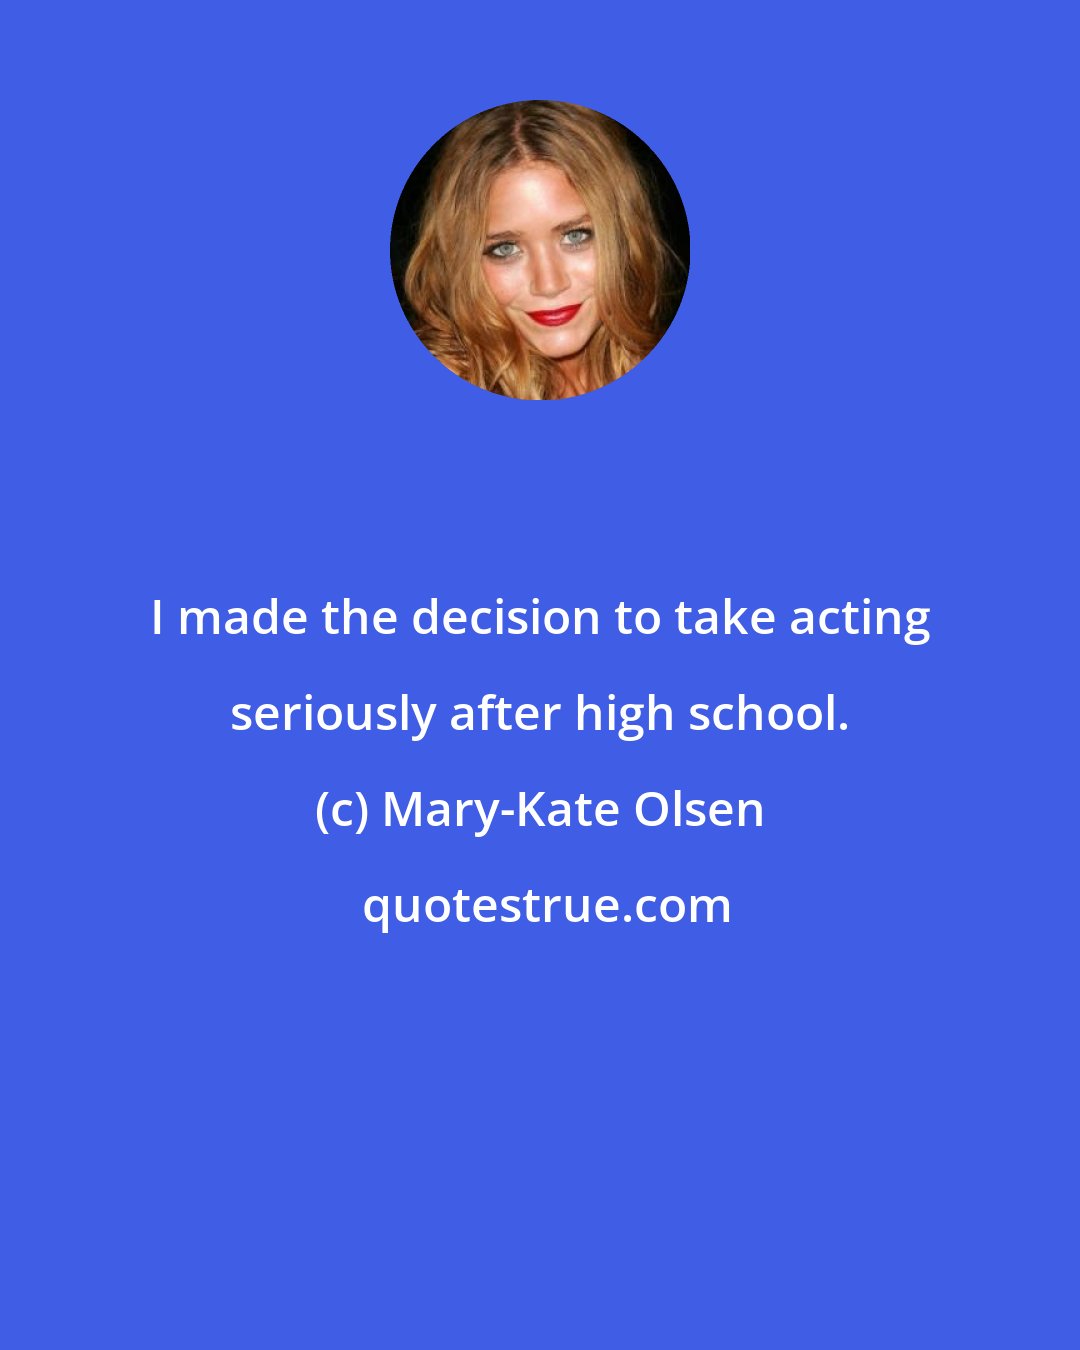 Mary-Kate Olsen: I made the decision to take acting seriously after high school.